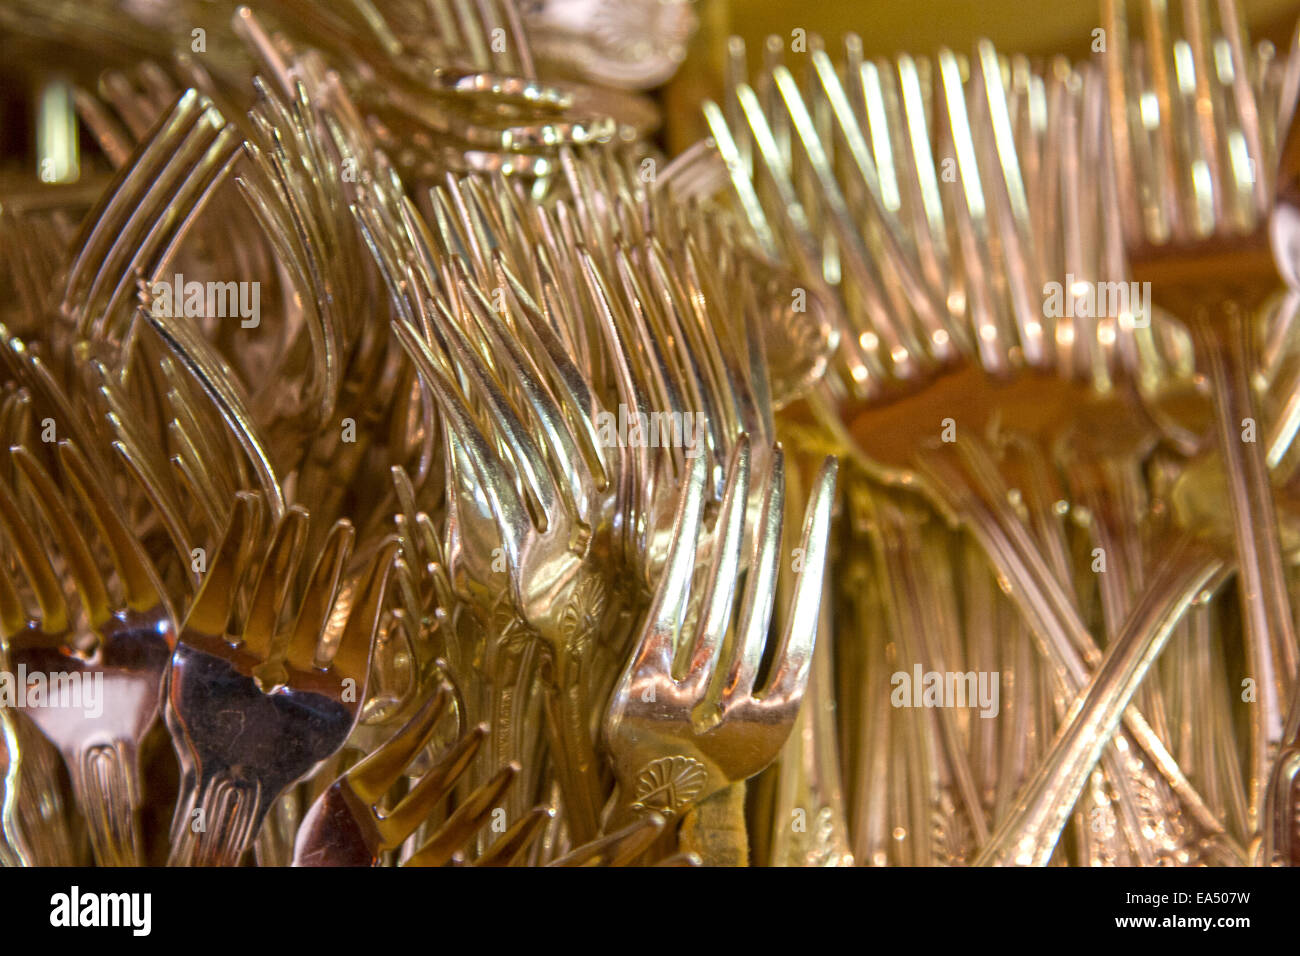 Still LIfe of silver forks aboard the Napa Valley Wine train in California. Stock Photo